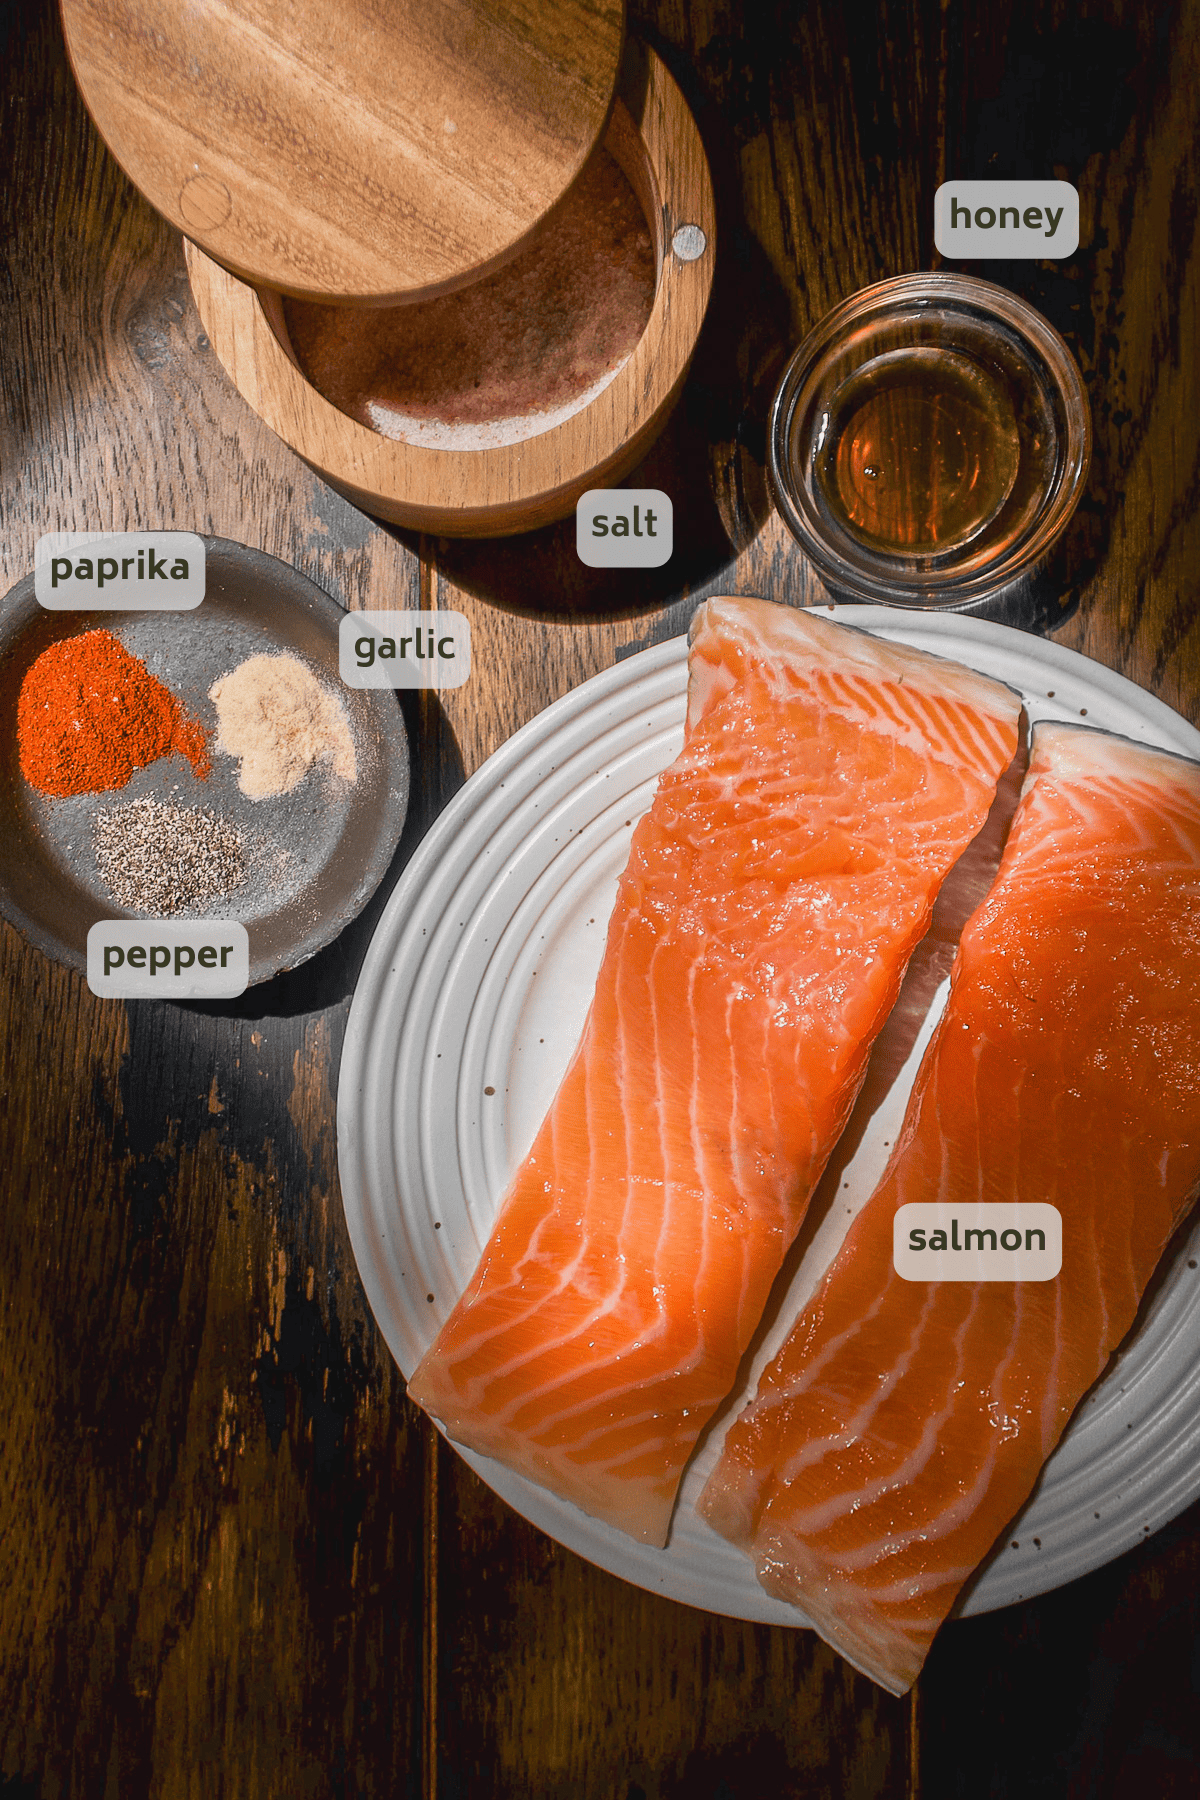 Air fried honey garlic salmon ingredients on a wooden surface.